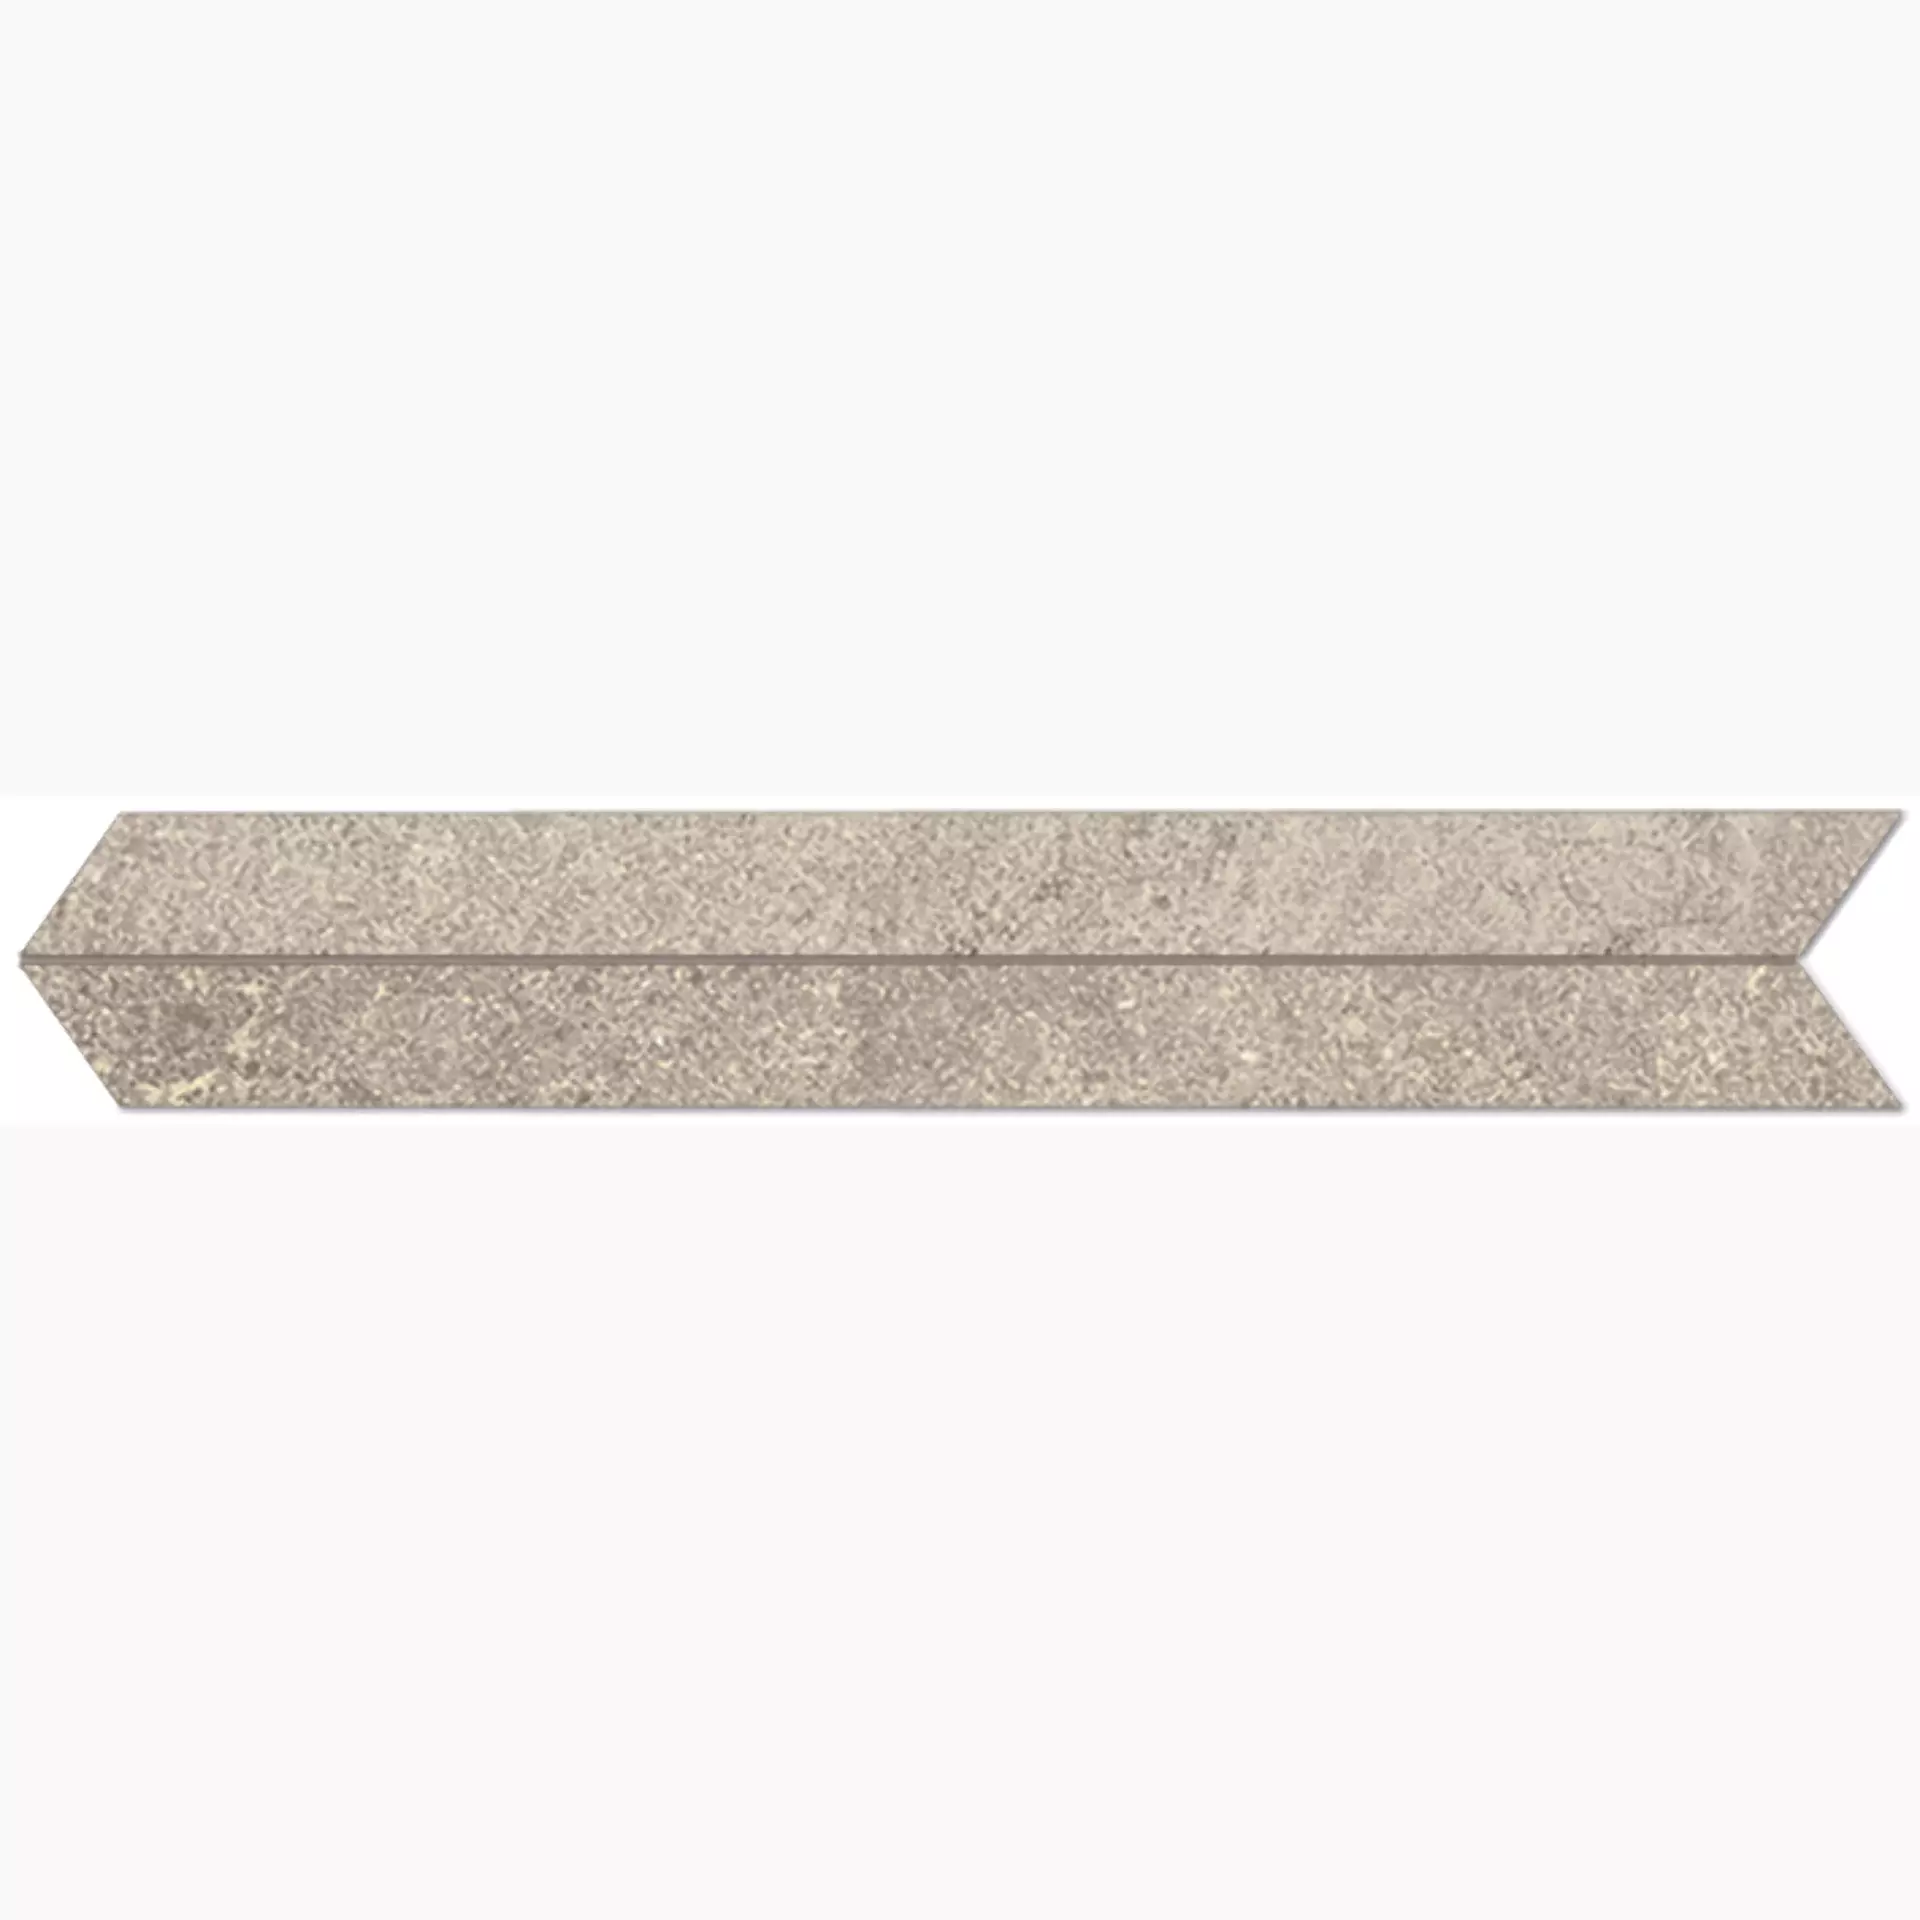 Fondovalle Planeto Moon Natural Chevron PNT303 10x60cm rectified 8,5mm